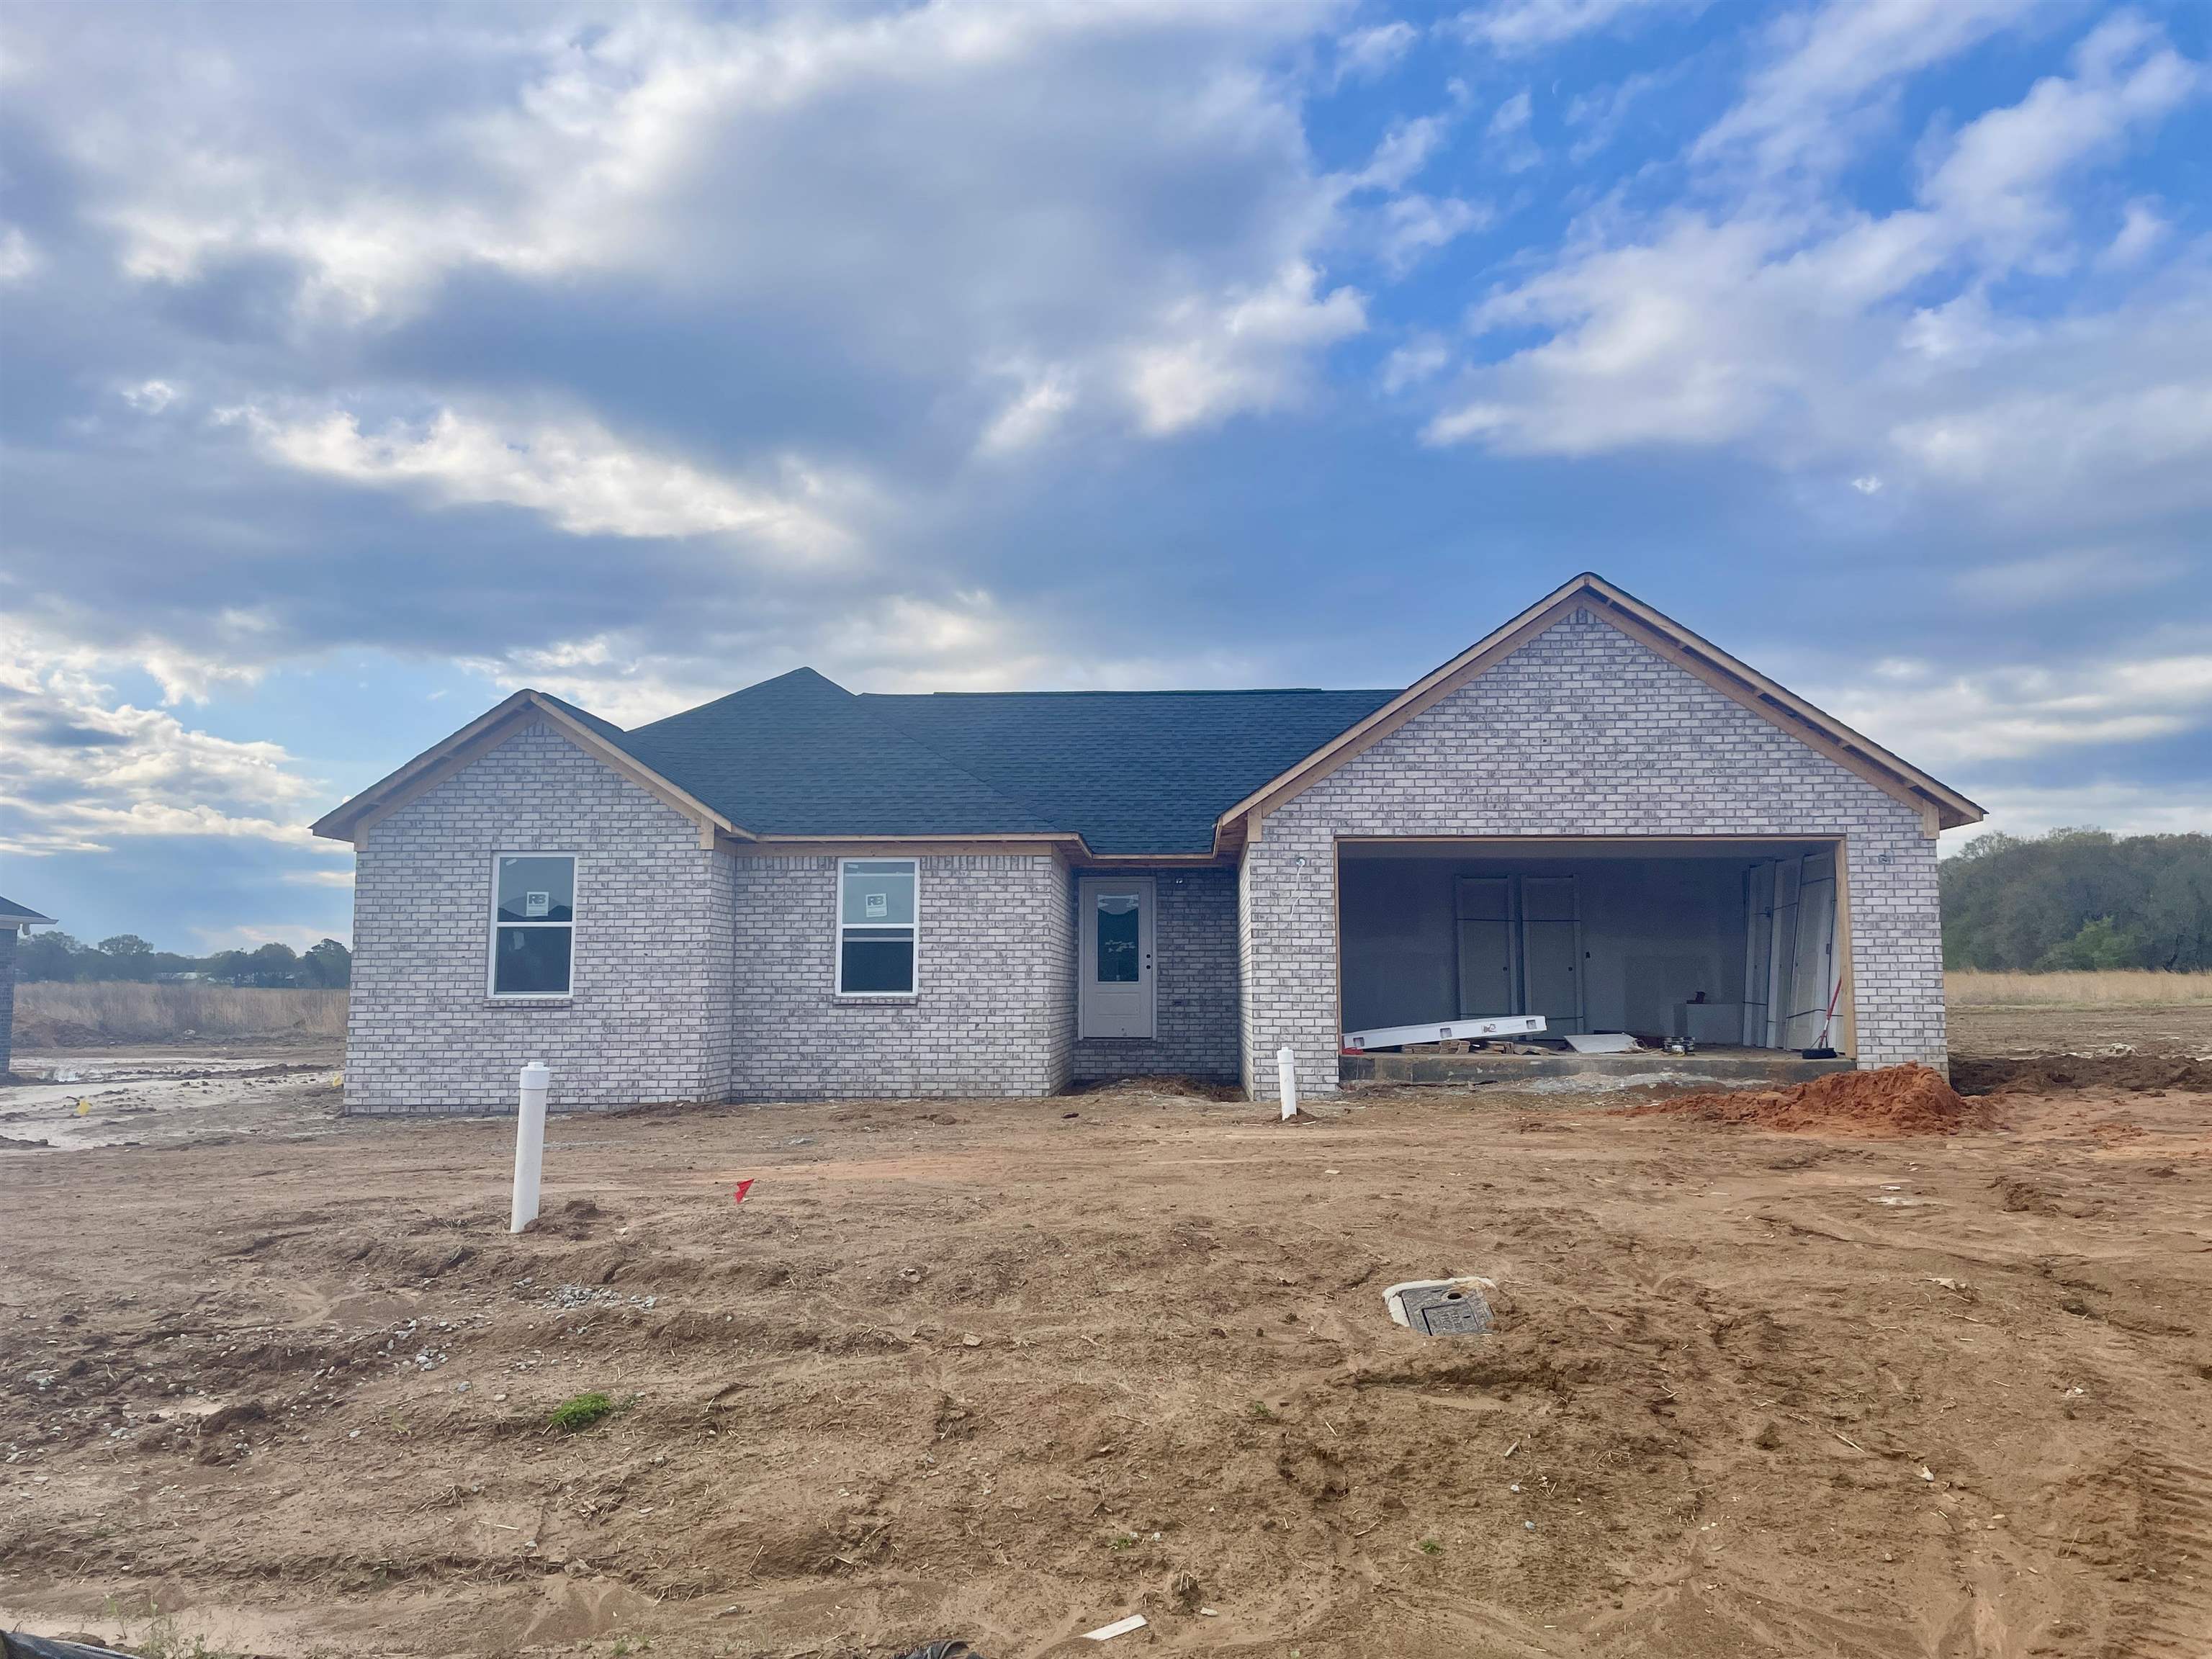 14010 Westhaven Cove, Milan, TN 38358